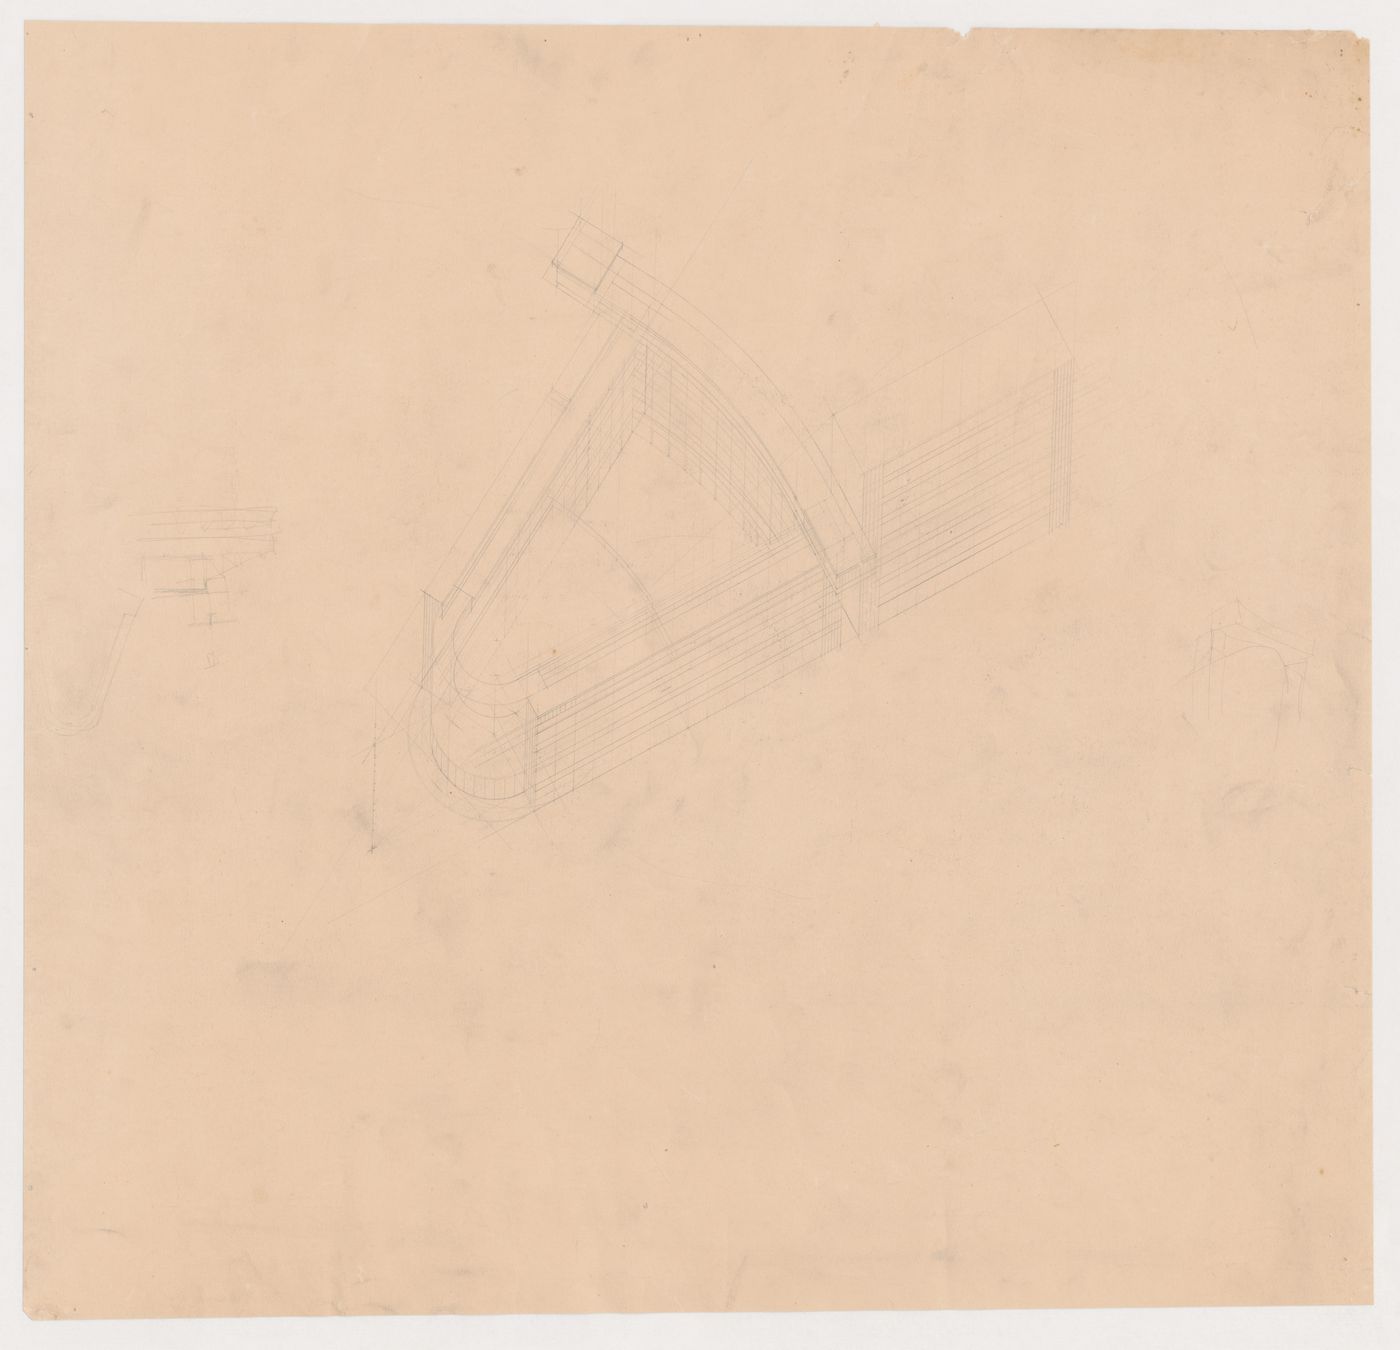 Axonometric for the 1926 design for People's University, Rotterdam, Netherlands; verso: Axonometric for the 1926 design for People's University, Rotterdam, Netherlands